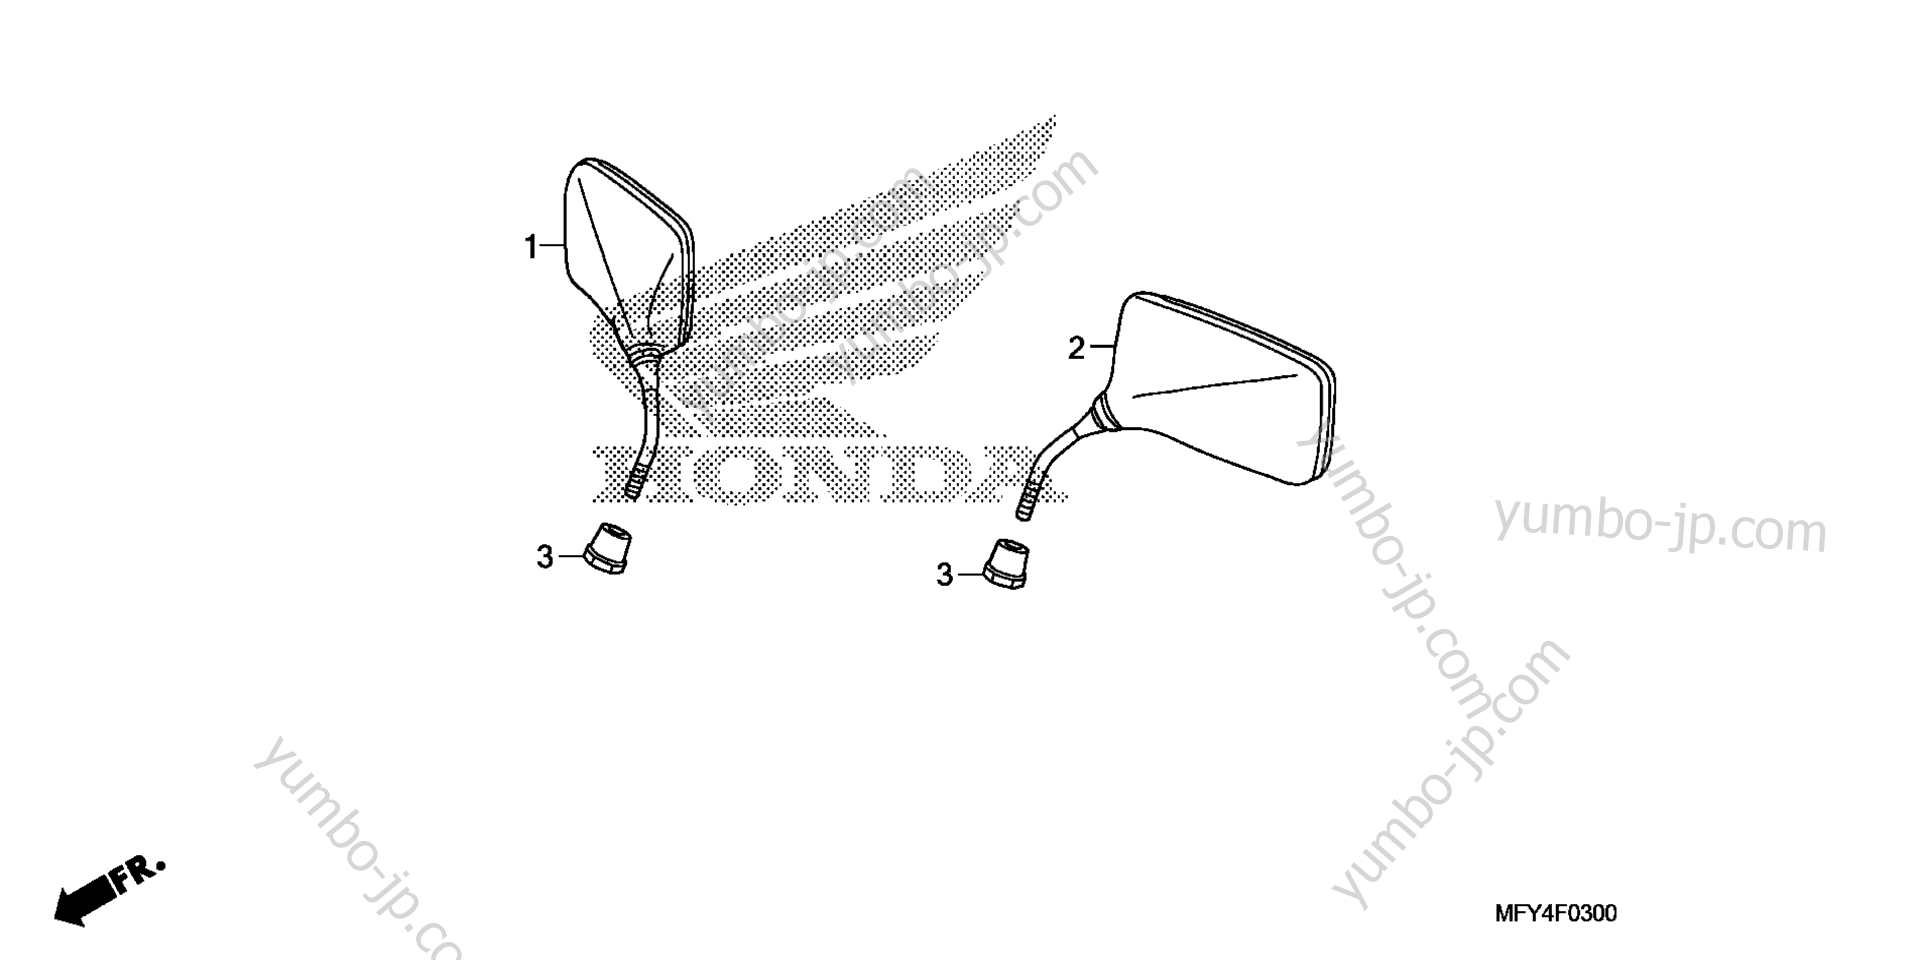 MIRROR for motorcycles HONDA VT1300CT AC 2011 year